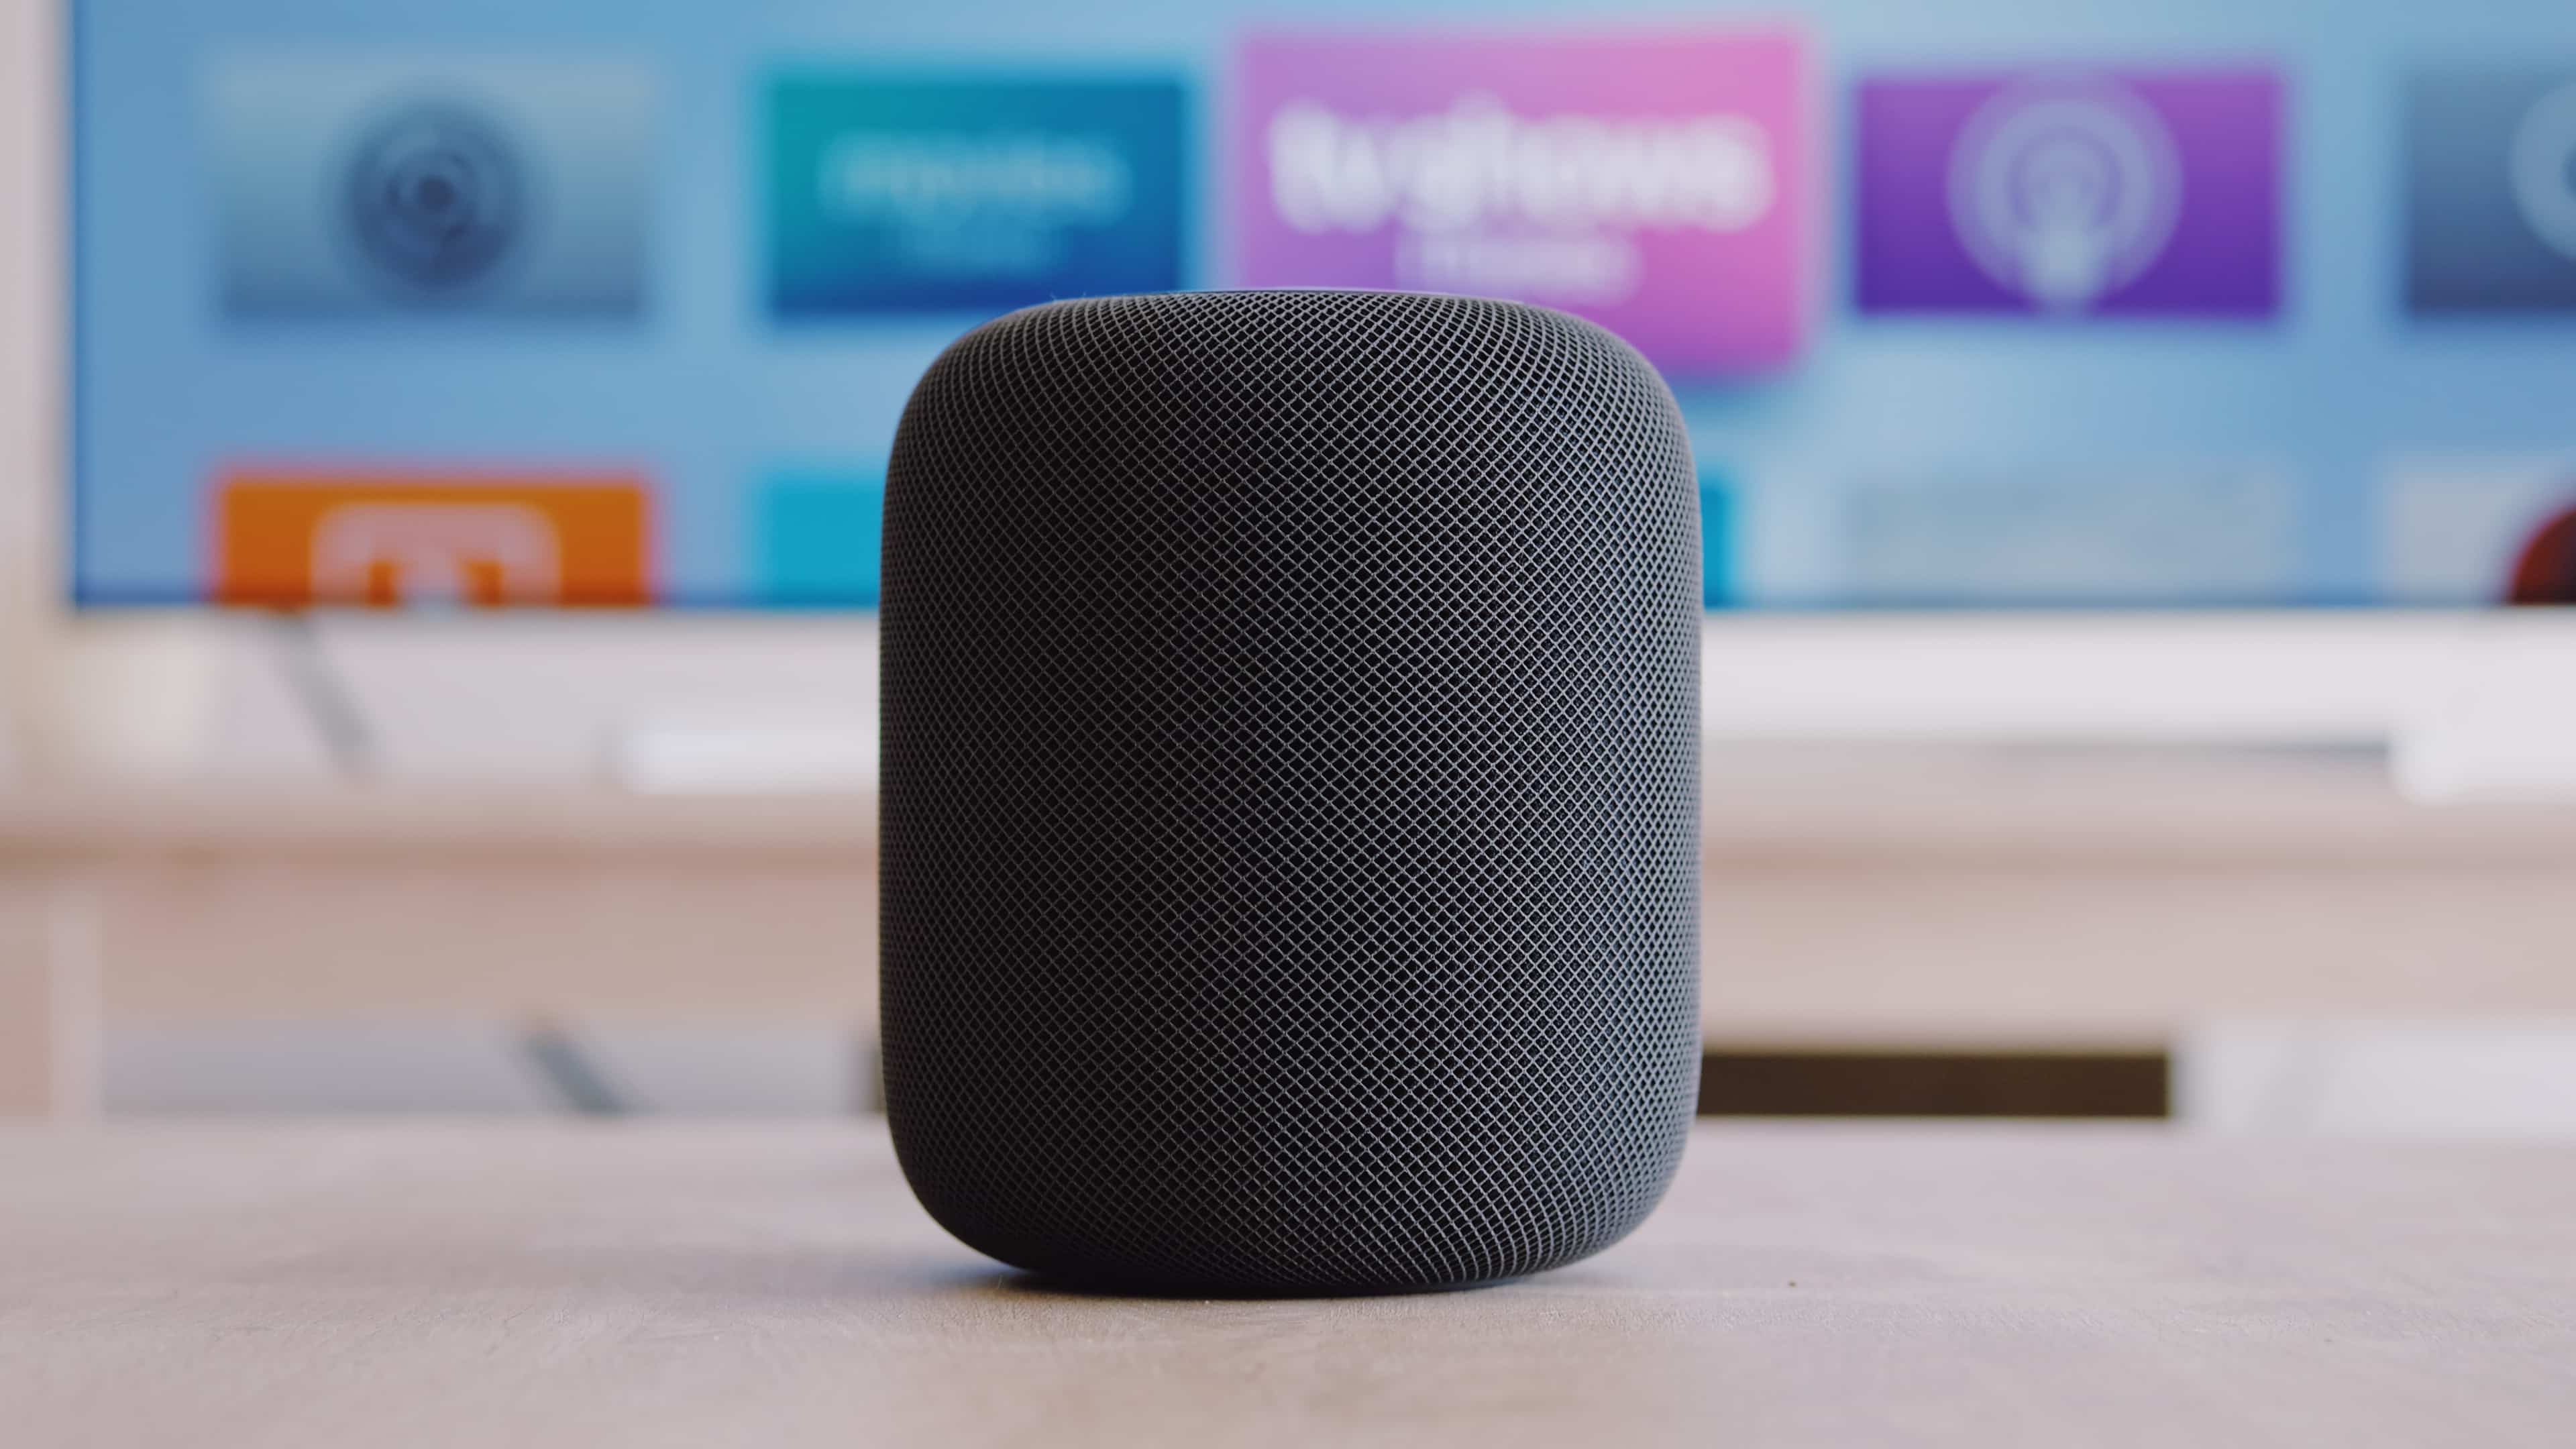 A black Apple HomePod wireless speaker laying on a table in front of a TV set which displays an Apple TV home screen